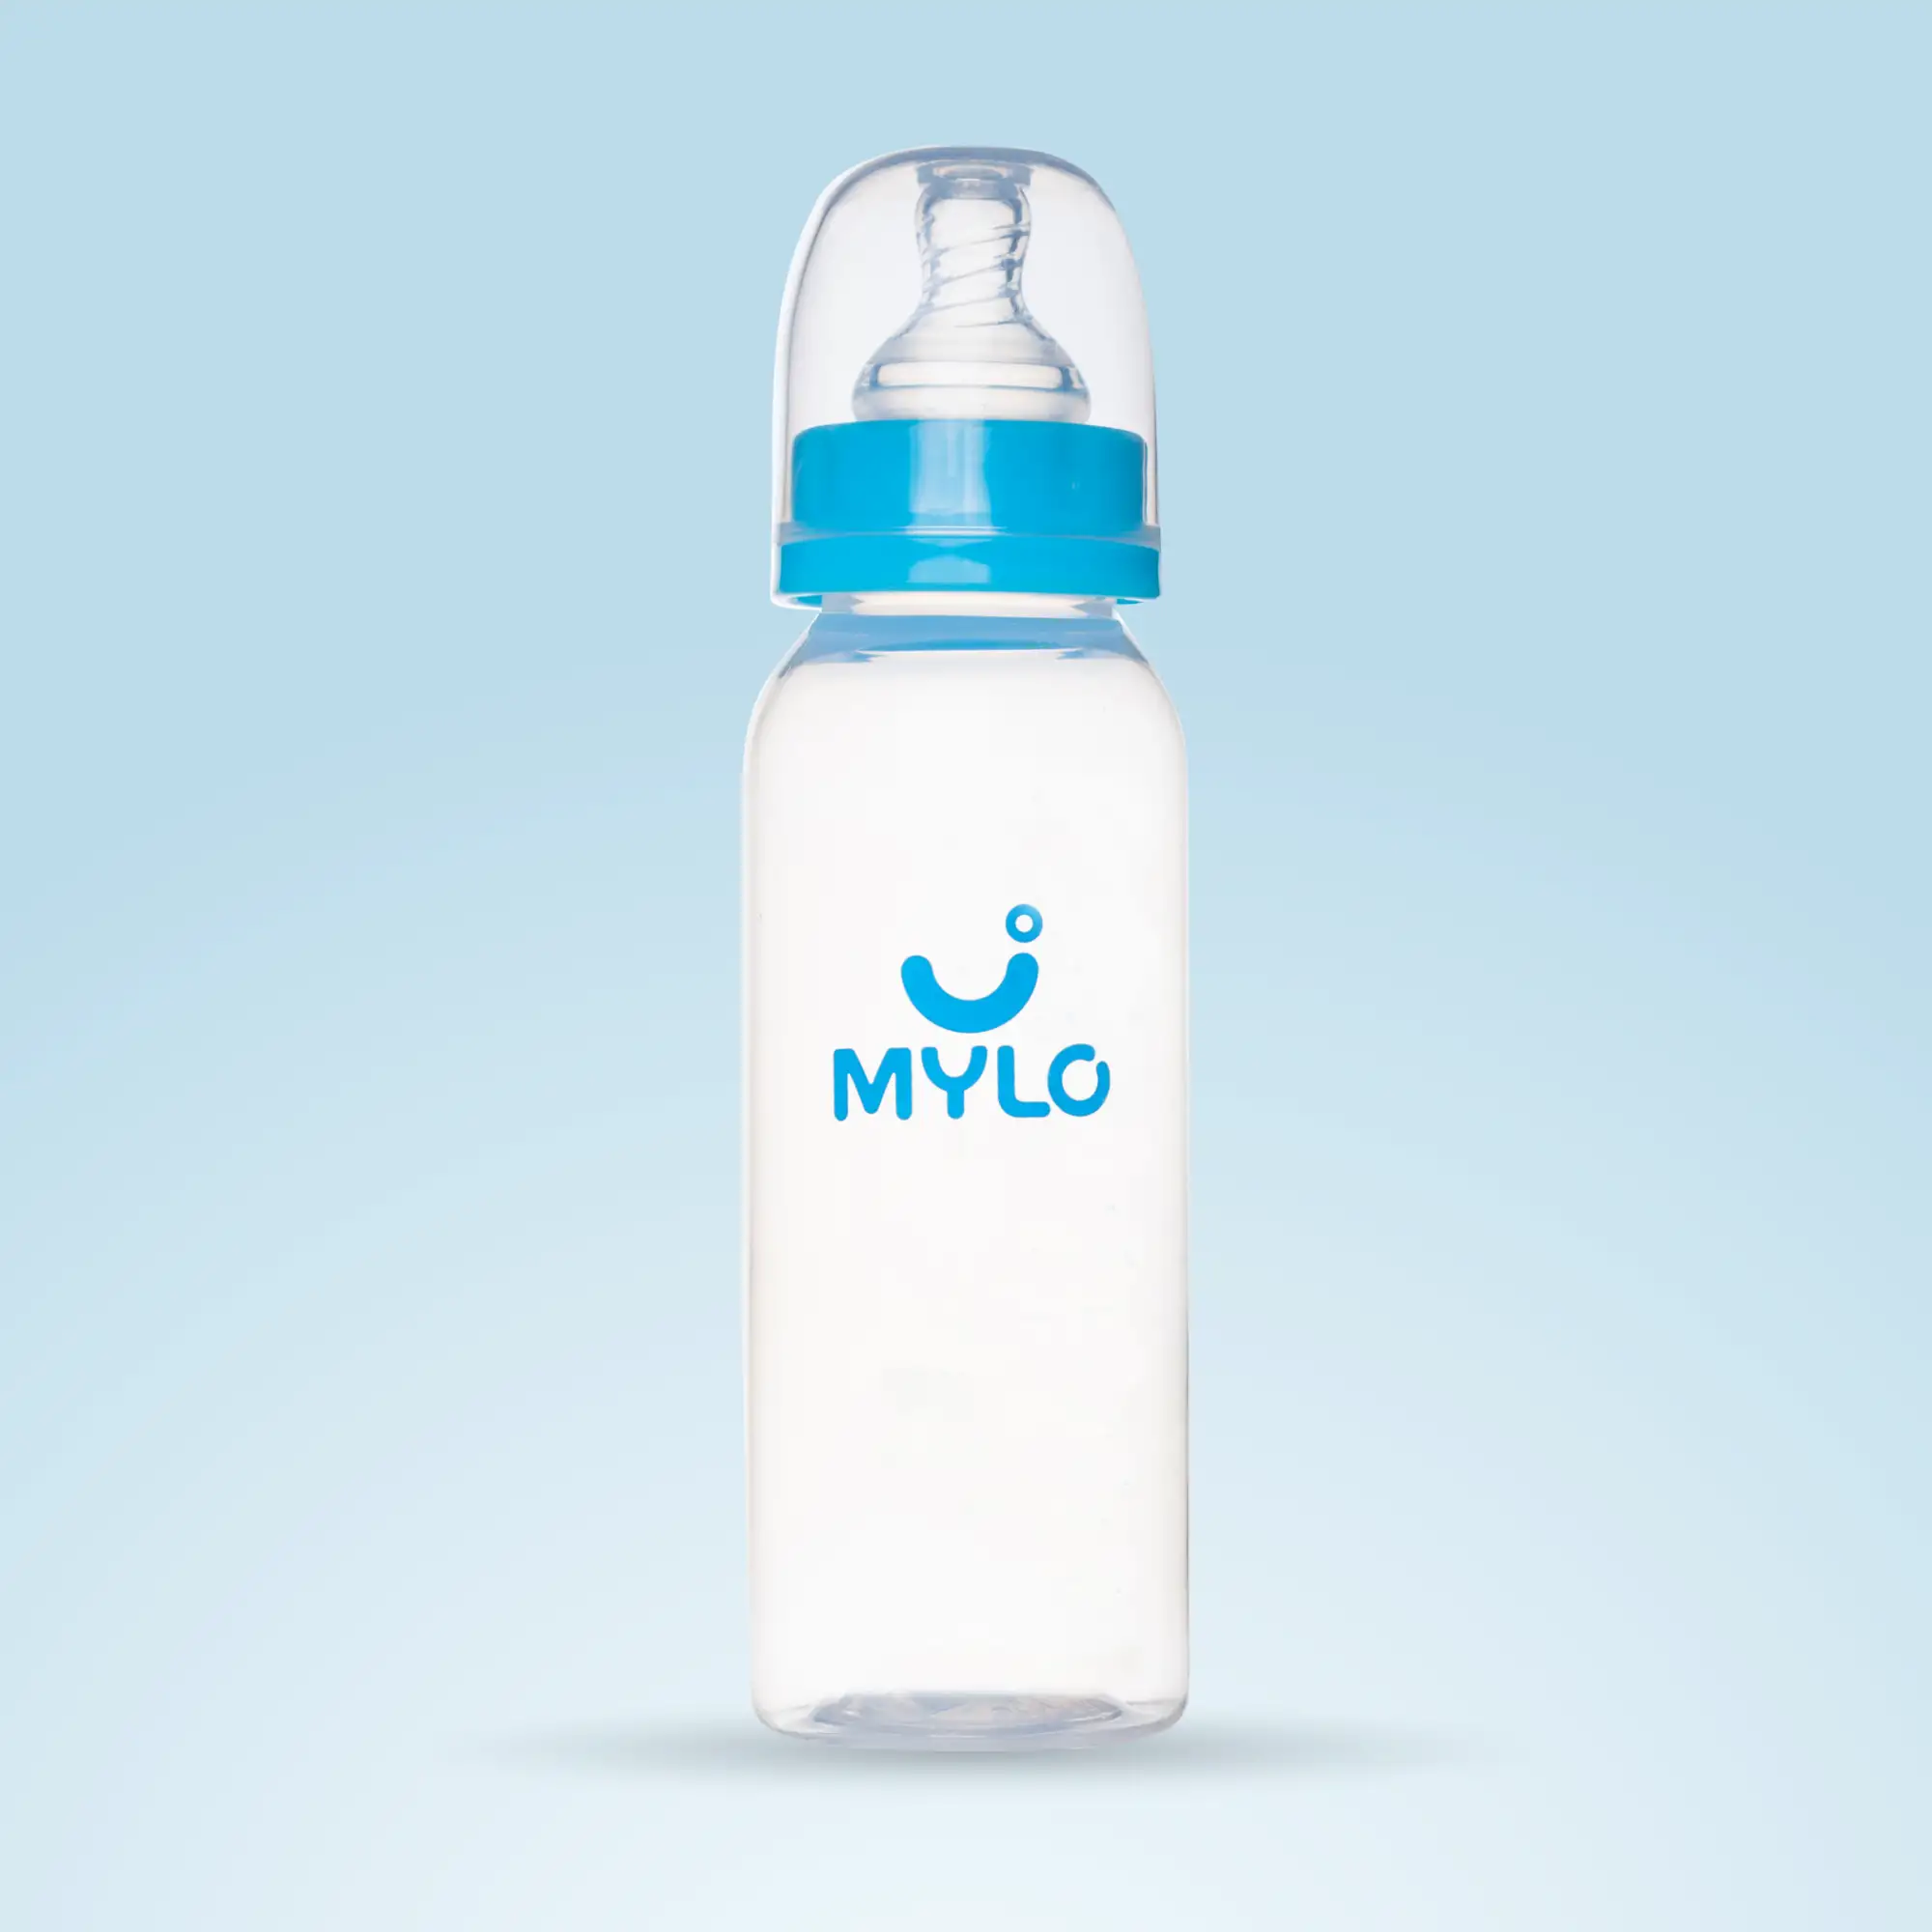 2-in-1 Baby Feeding Bottle | BPA Free with Anti-Colic Nipple & Spoon | Feels Natural Baby Bottle | Easy Flow Neck Design - Blue 250ml